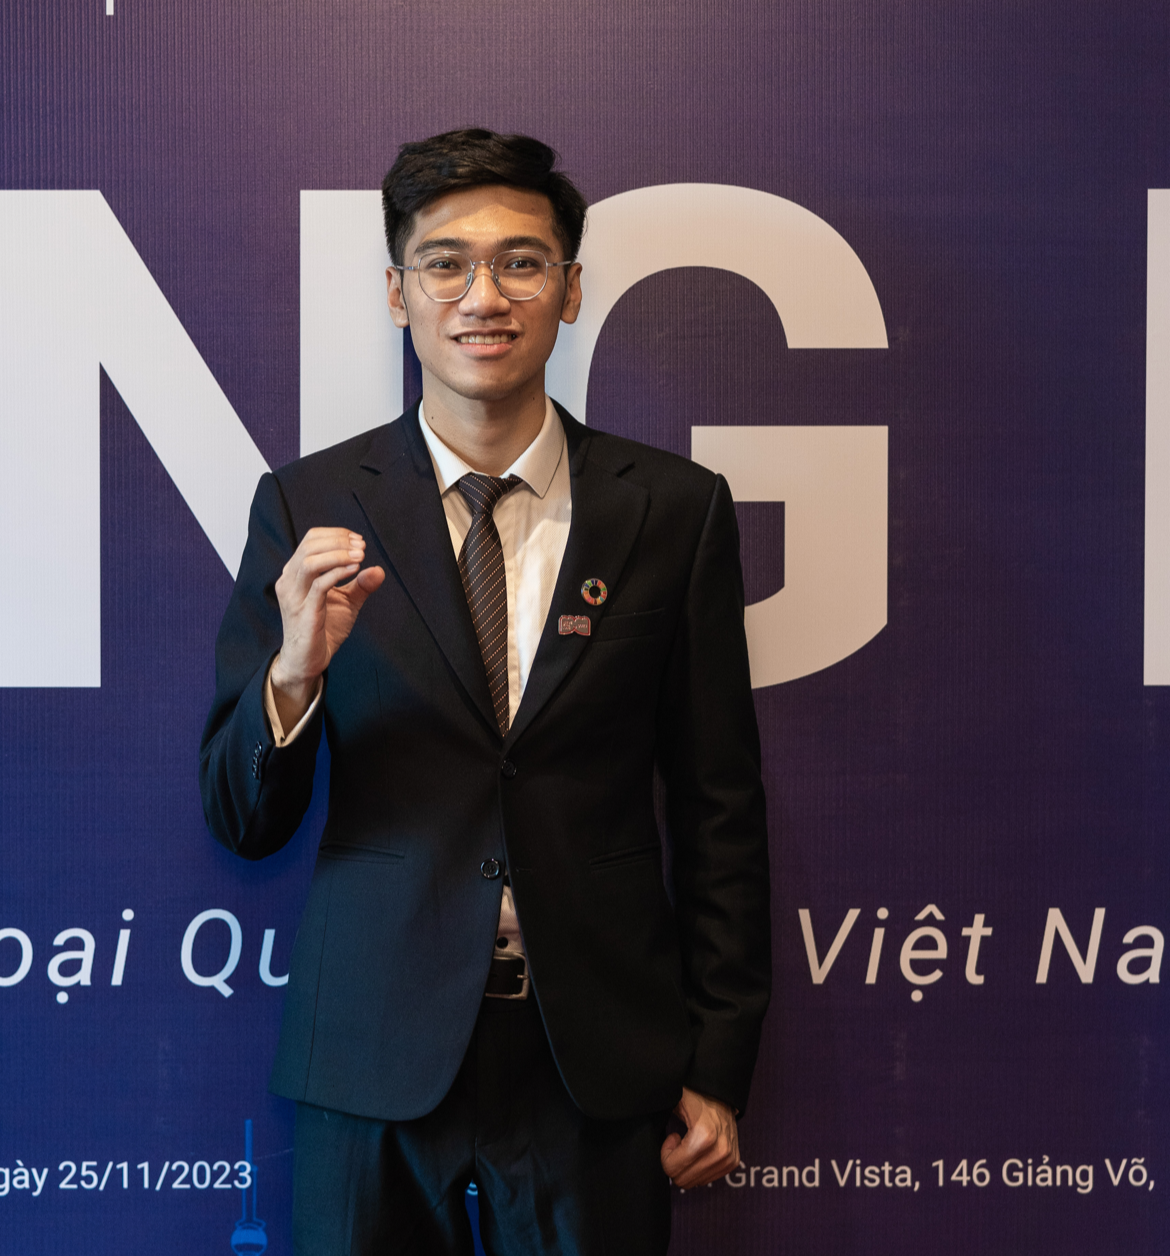 ong-le-thanh-giang-pld-1701005016.png